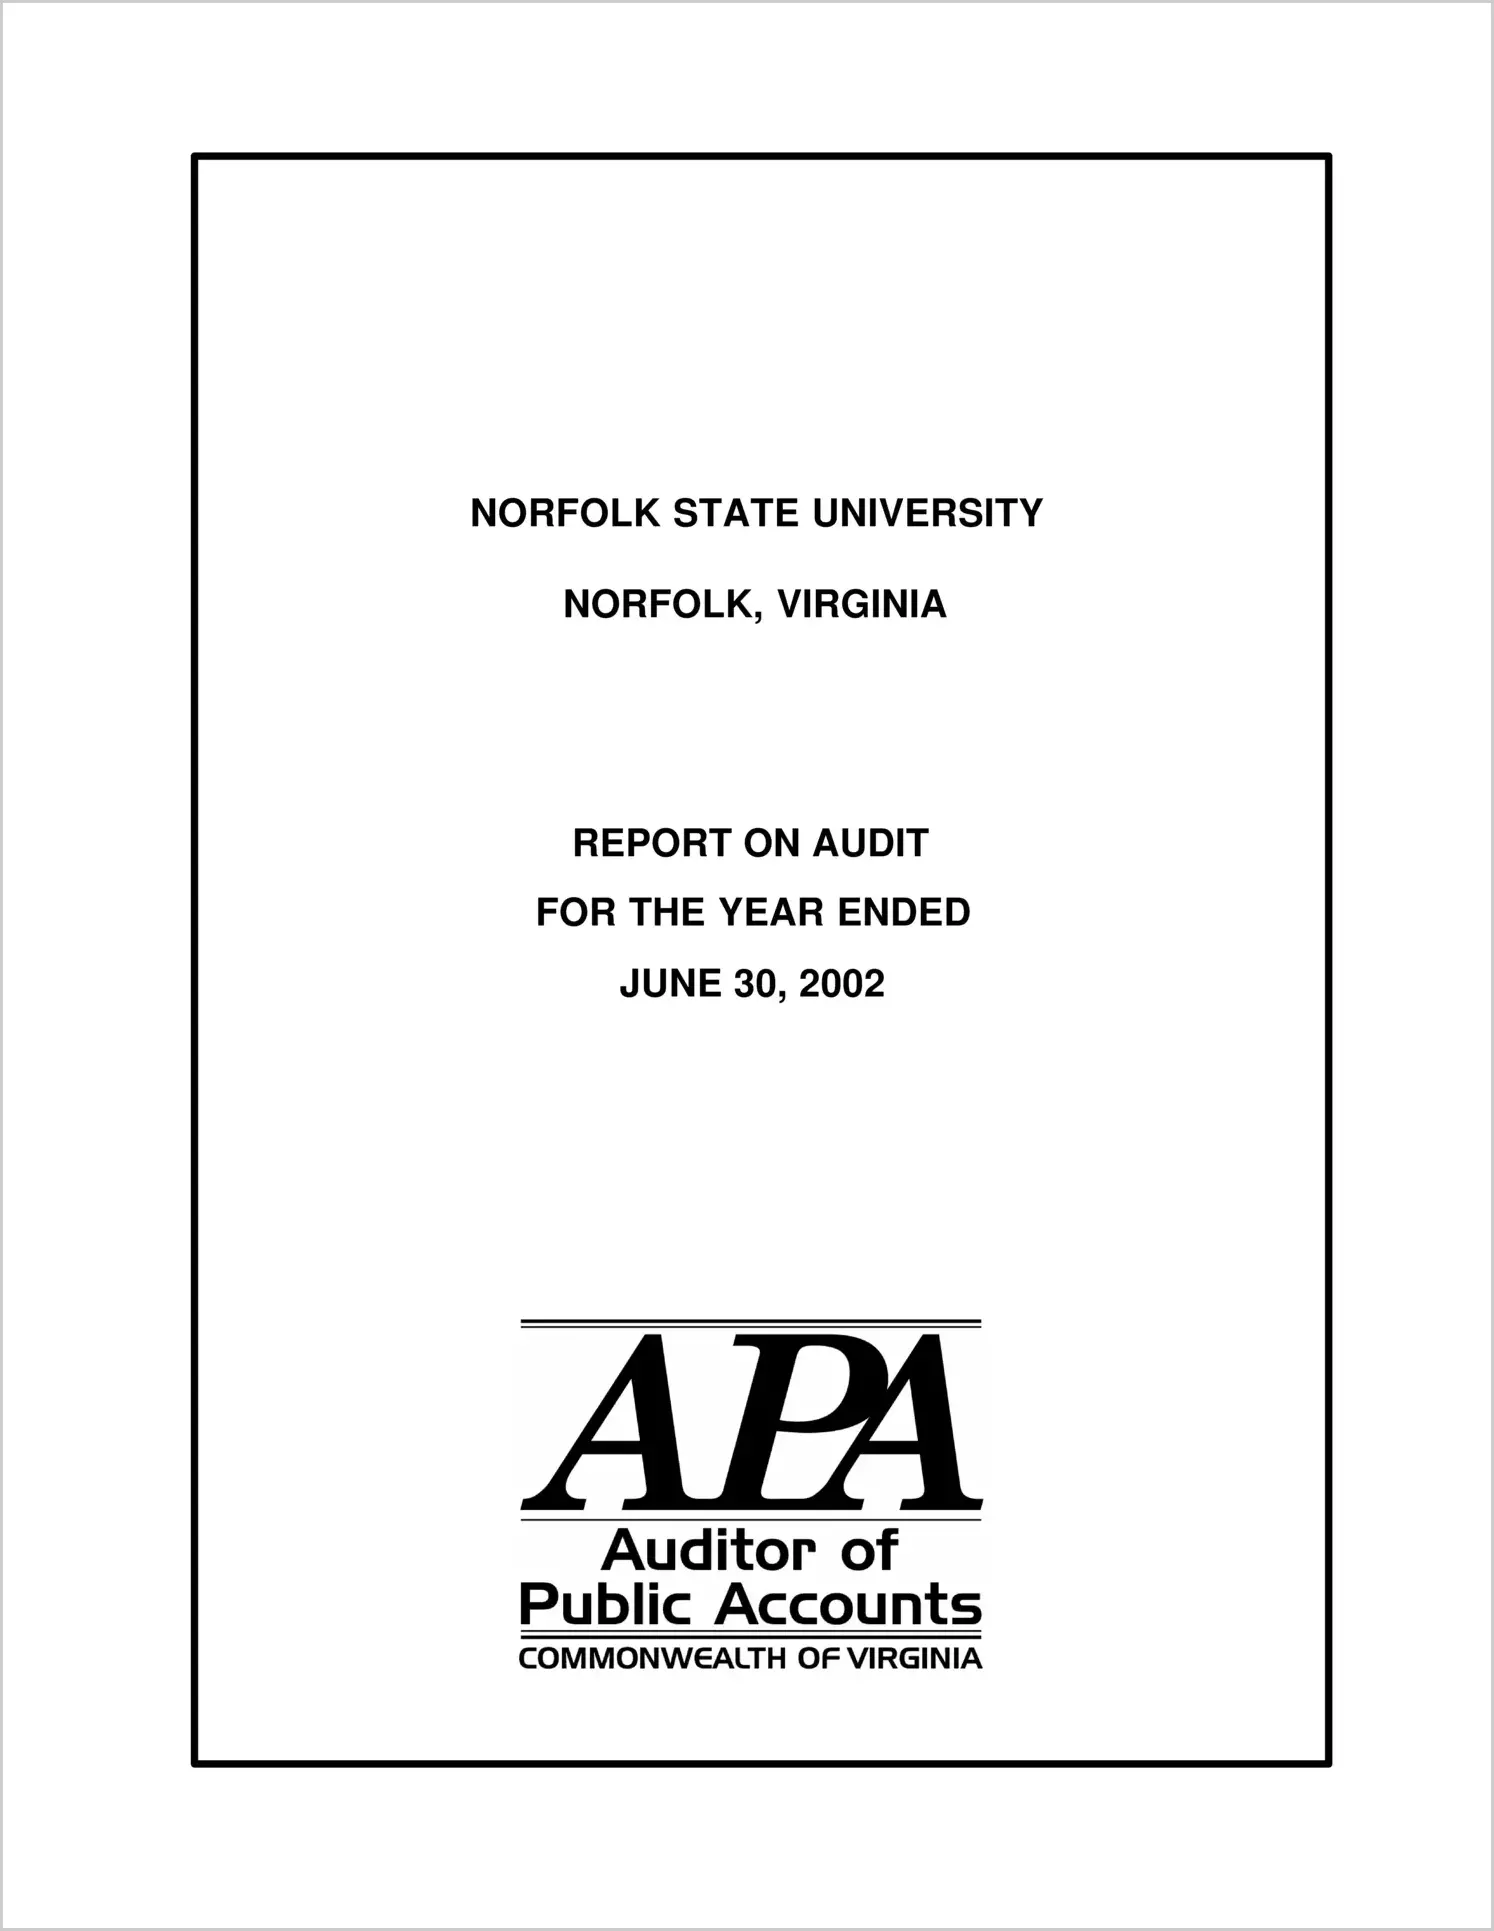 Norfolk State University for the year ended June 30, 2002